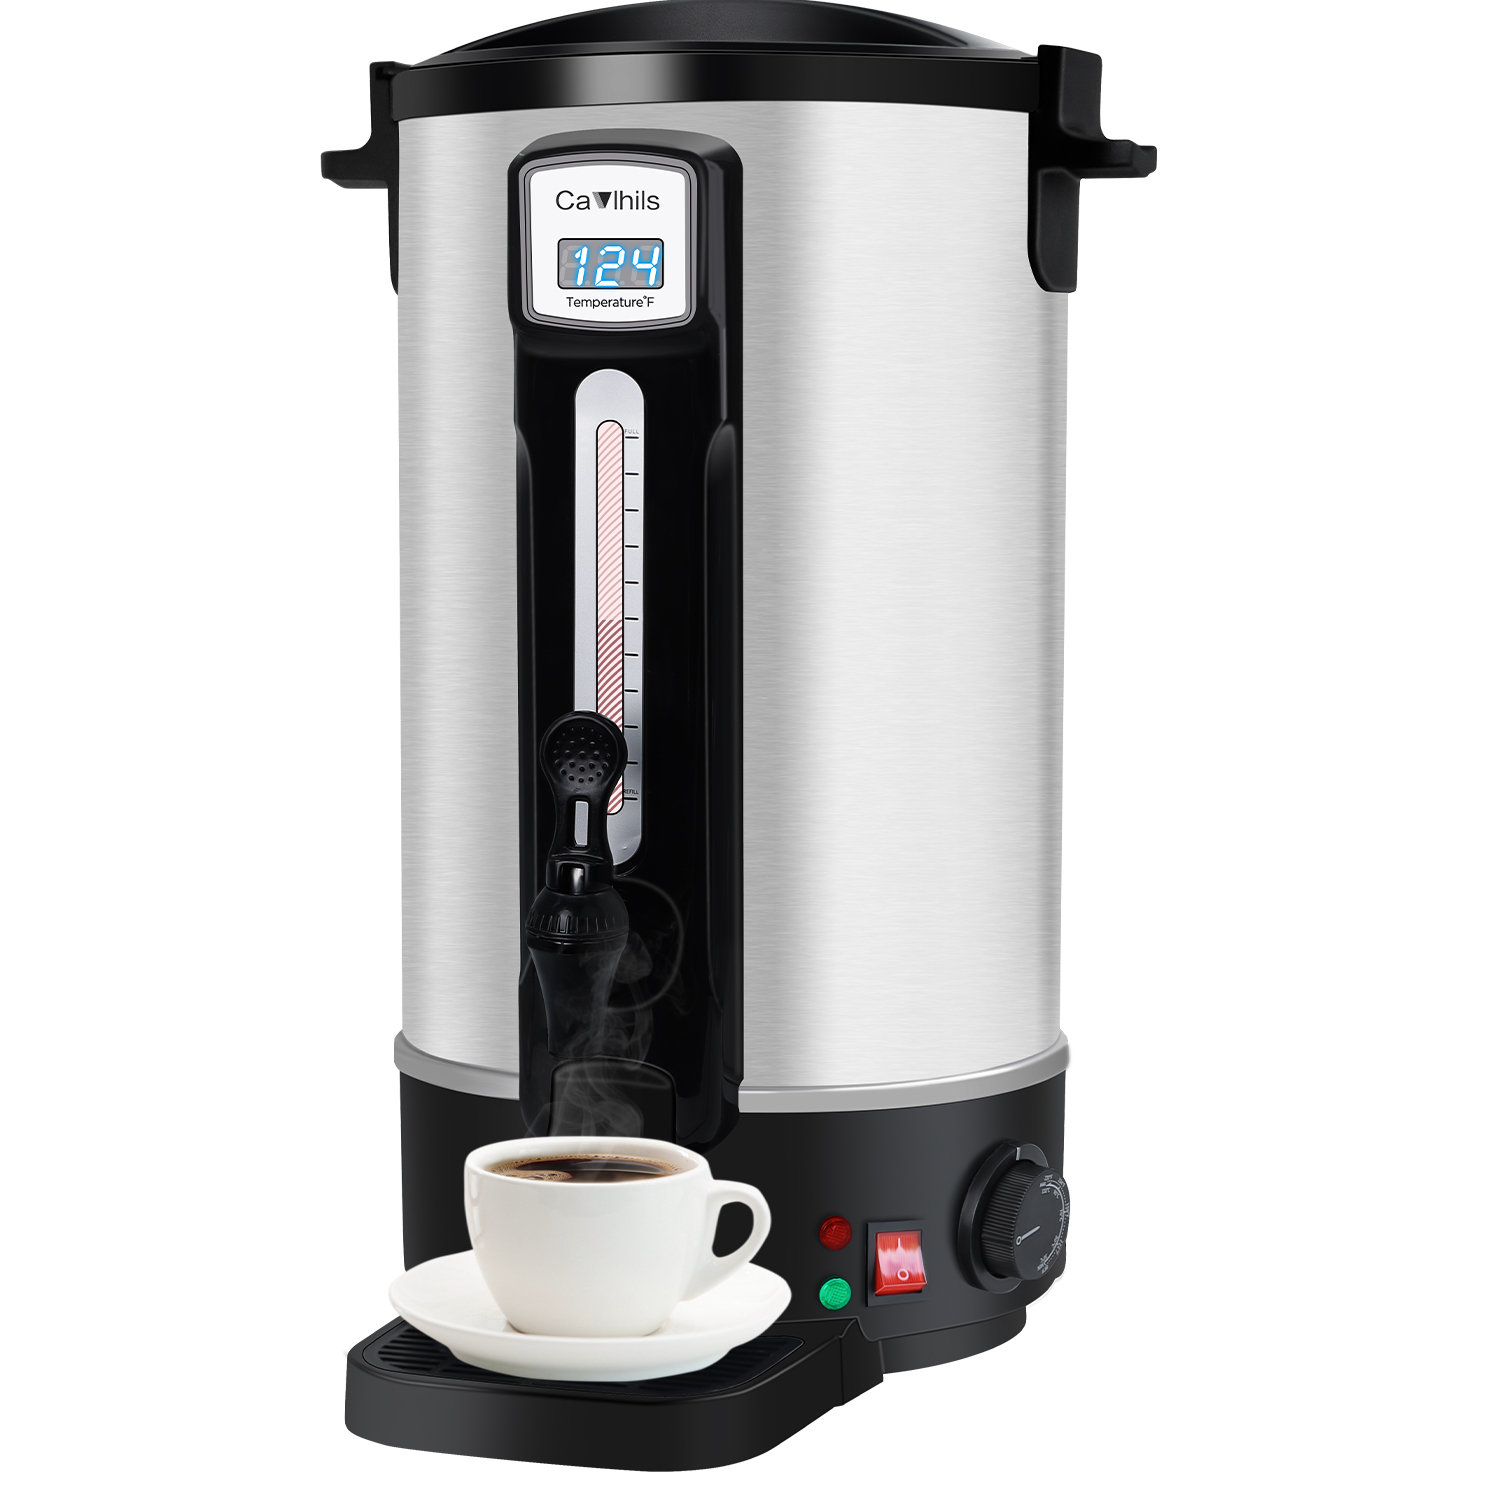 Kcourh Commercial Large Coffee Urn 100-Cup Coffee Maker